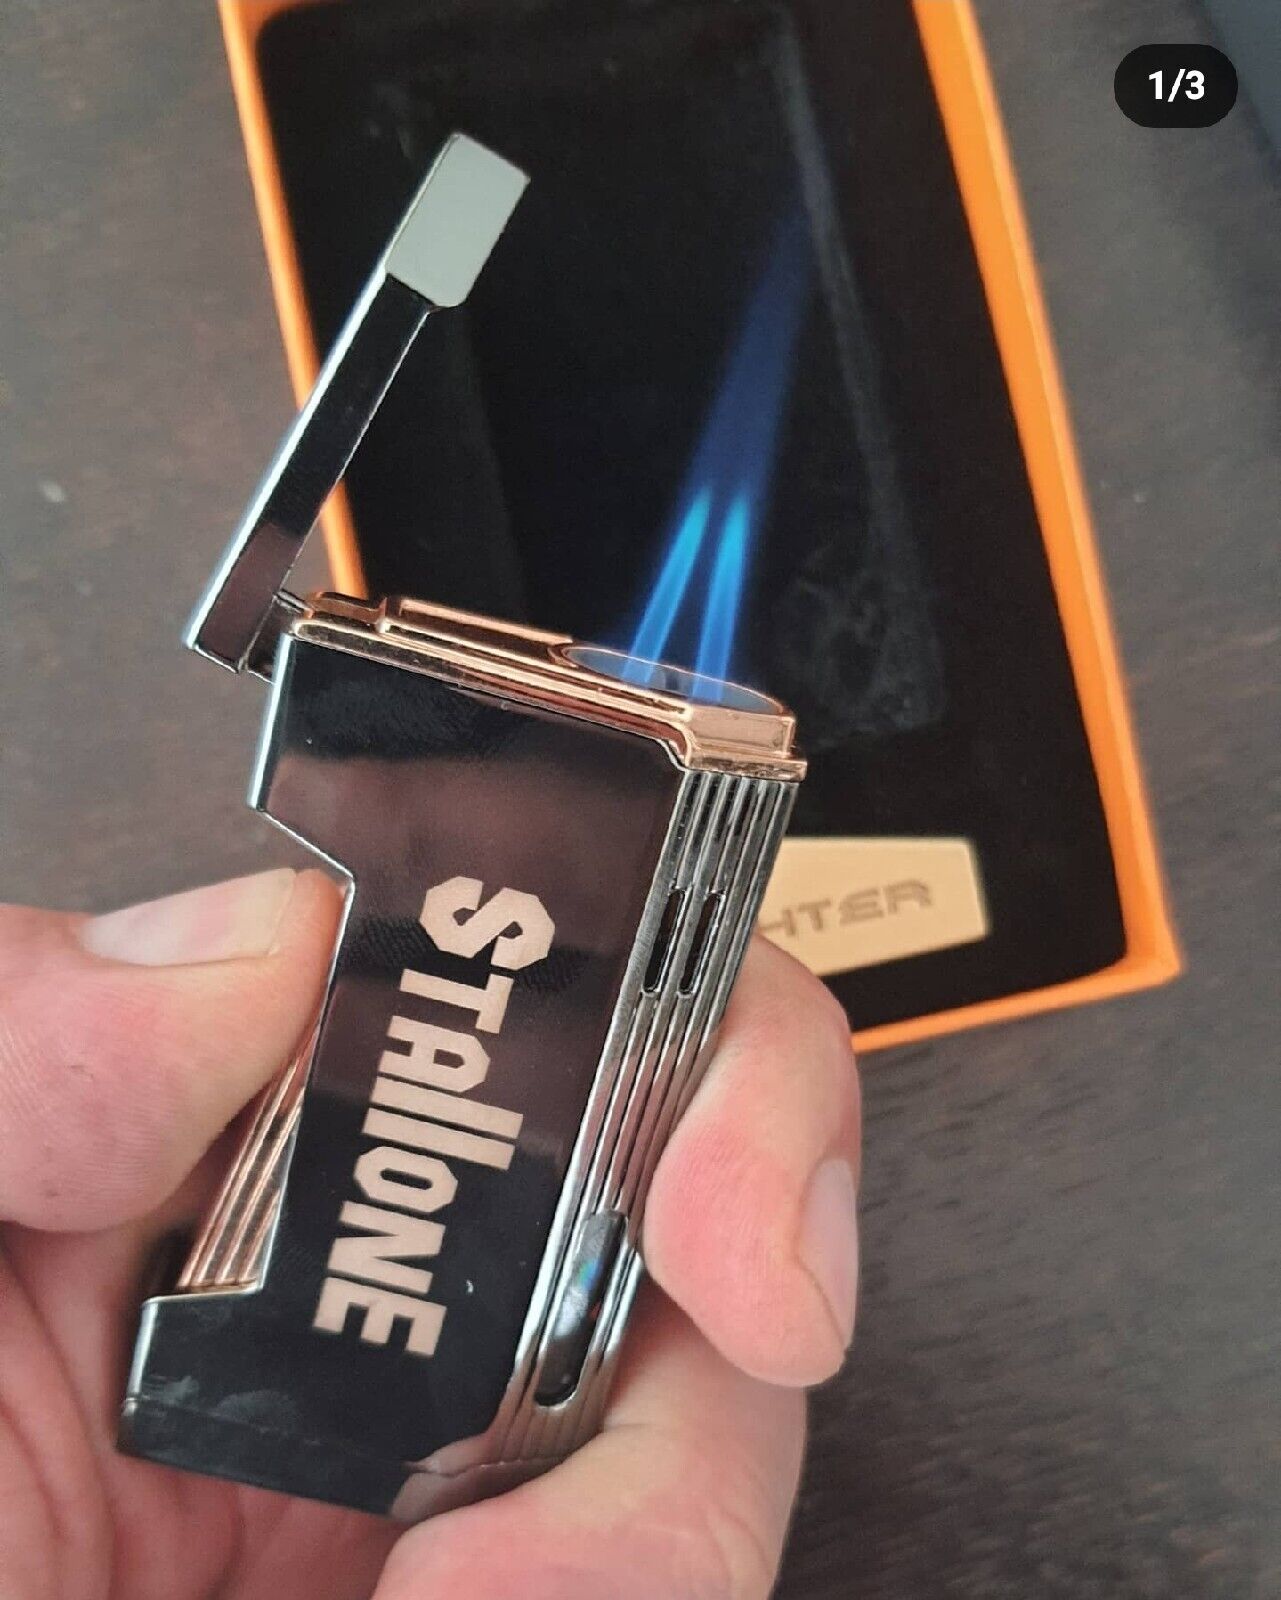 STALLONE CIGARS NEW DOUBLE FLAME TORCH BUTANE LIGHTER RECHARGABLE W/GIFT BOX 